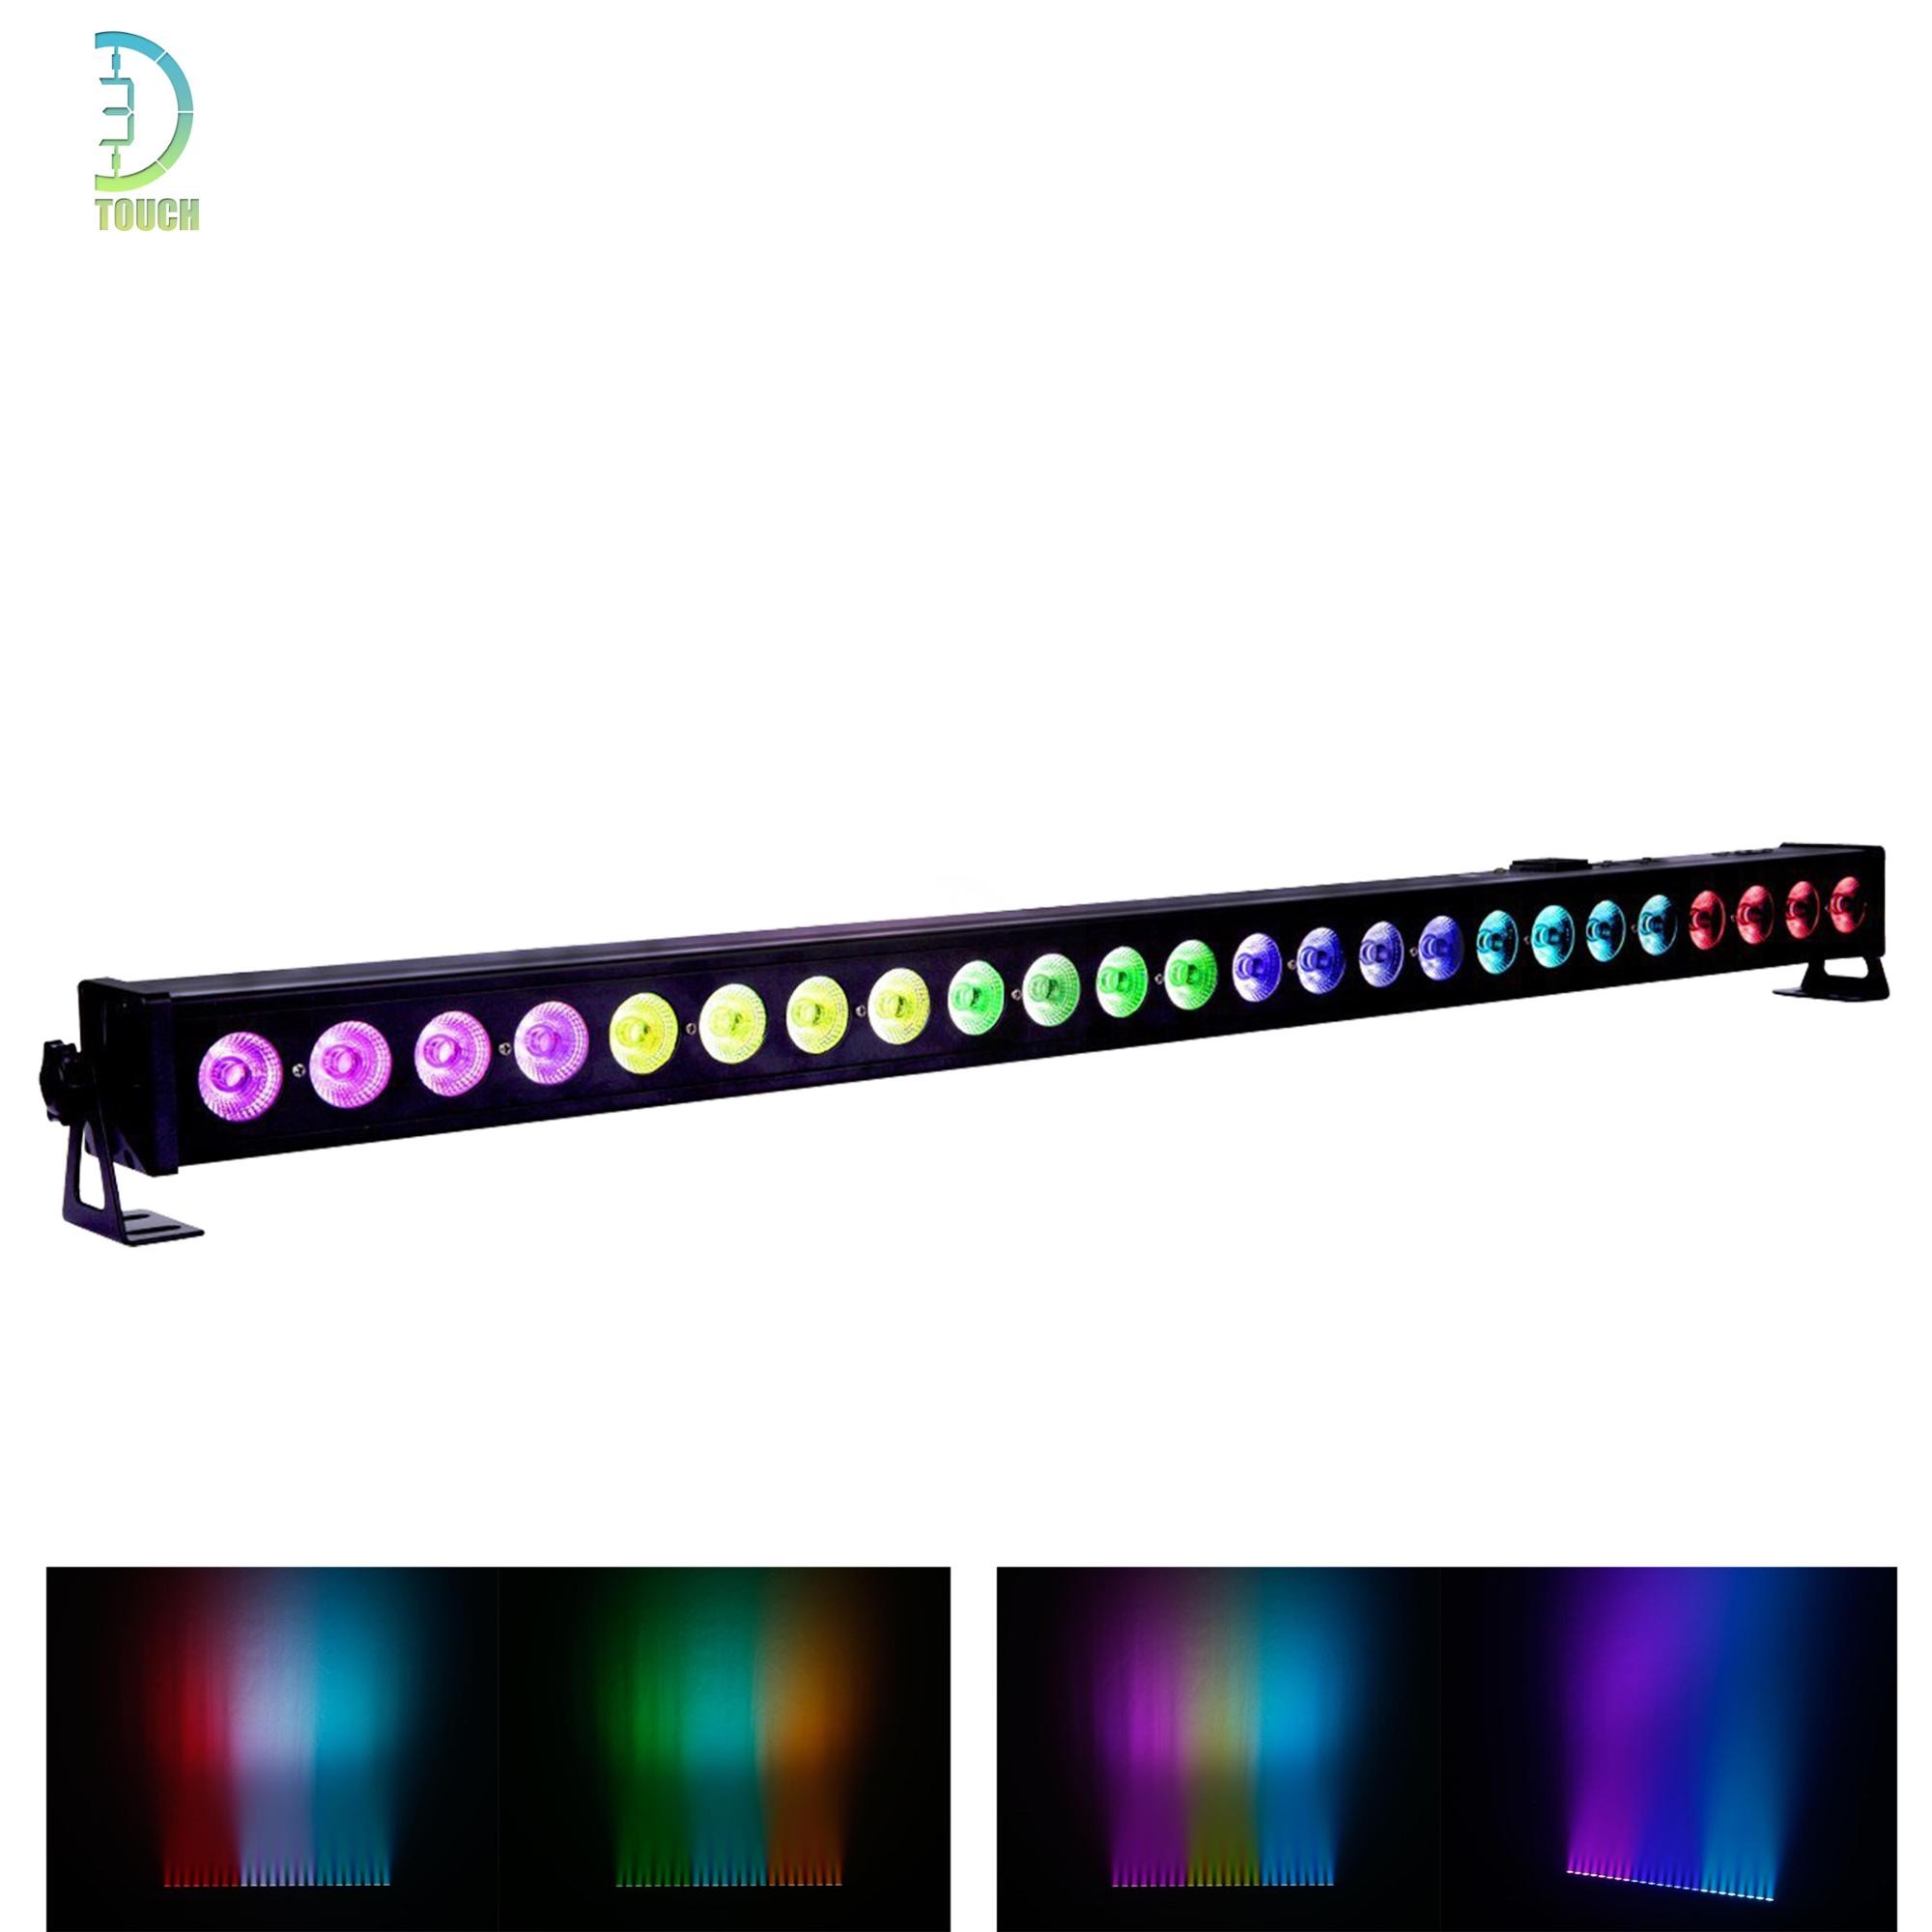 LED Wall Washer Lighting 24 X 3 W TRI LED Bar In Black Housing With IR Remote Control For Wedding Party DJ Event Wholesale Price